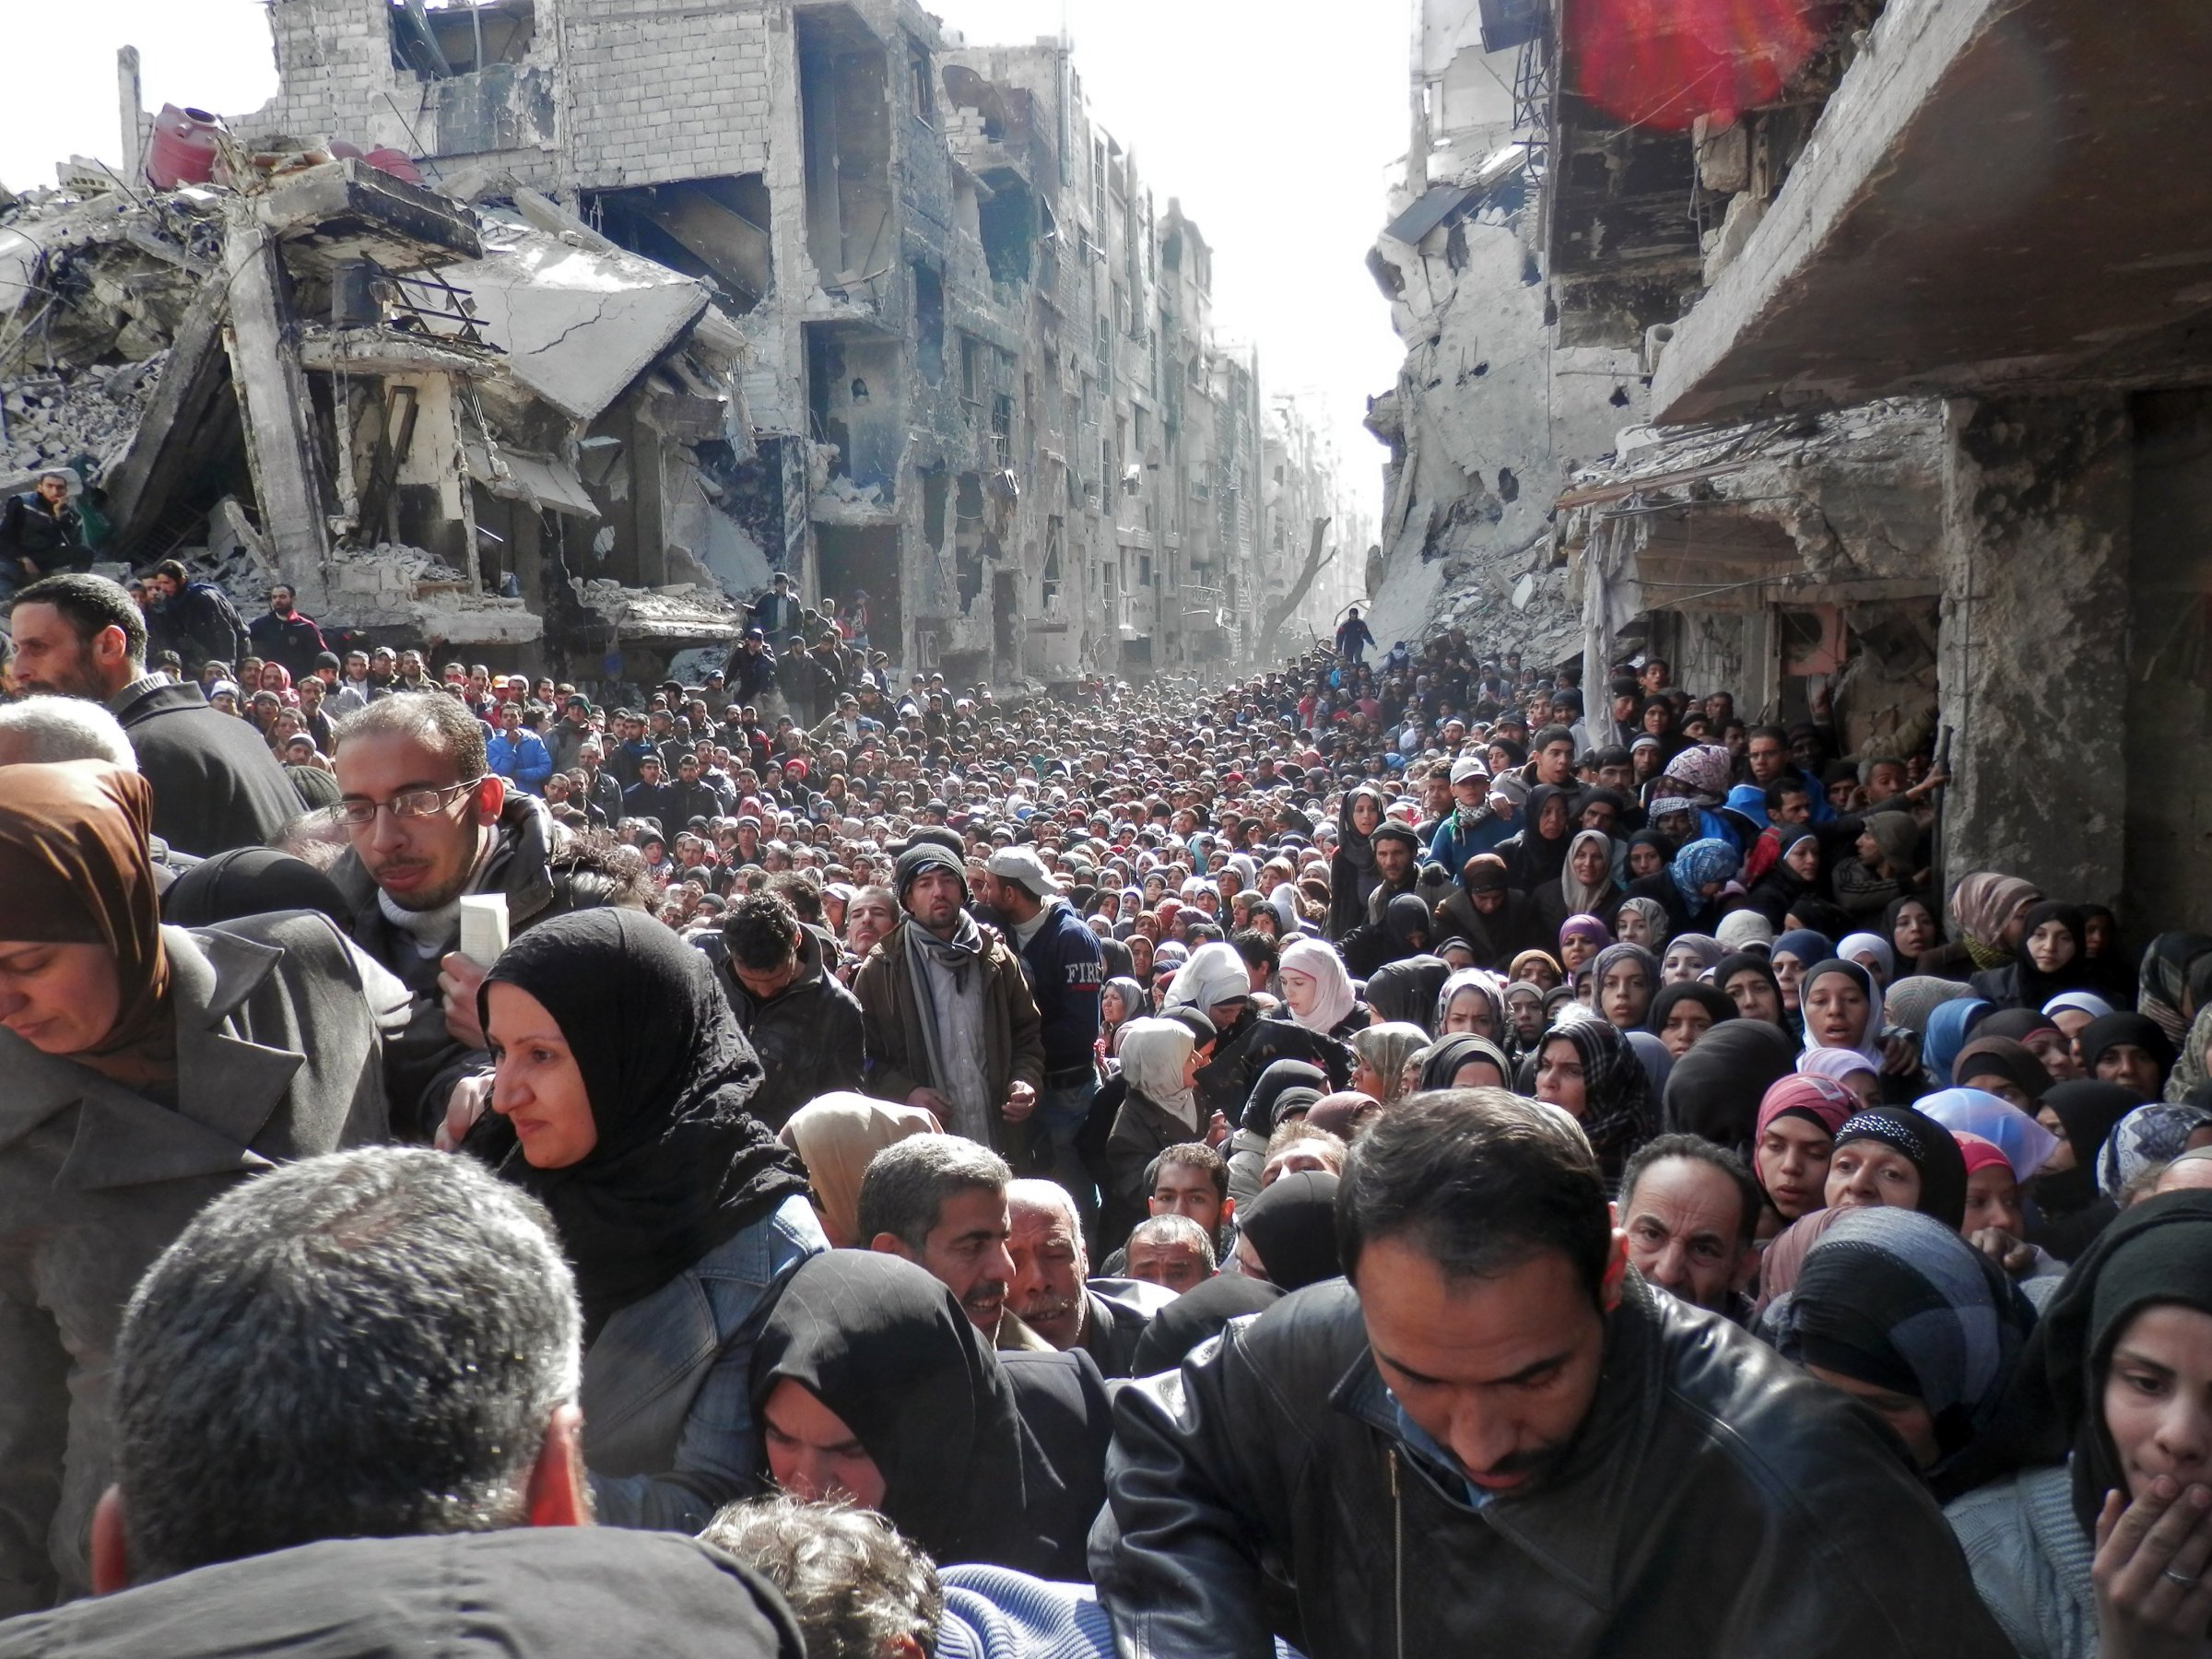 Residents wait in line to receive food aid distributed in the Yarmouk refugee camp on Jan. 31, 2014 in Damascus.